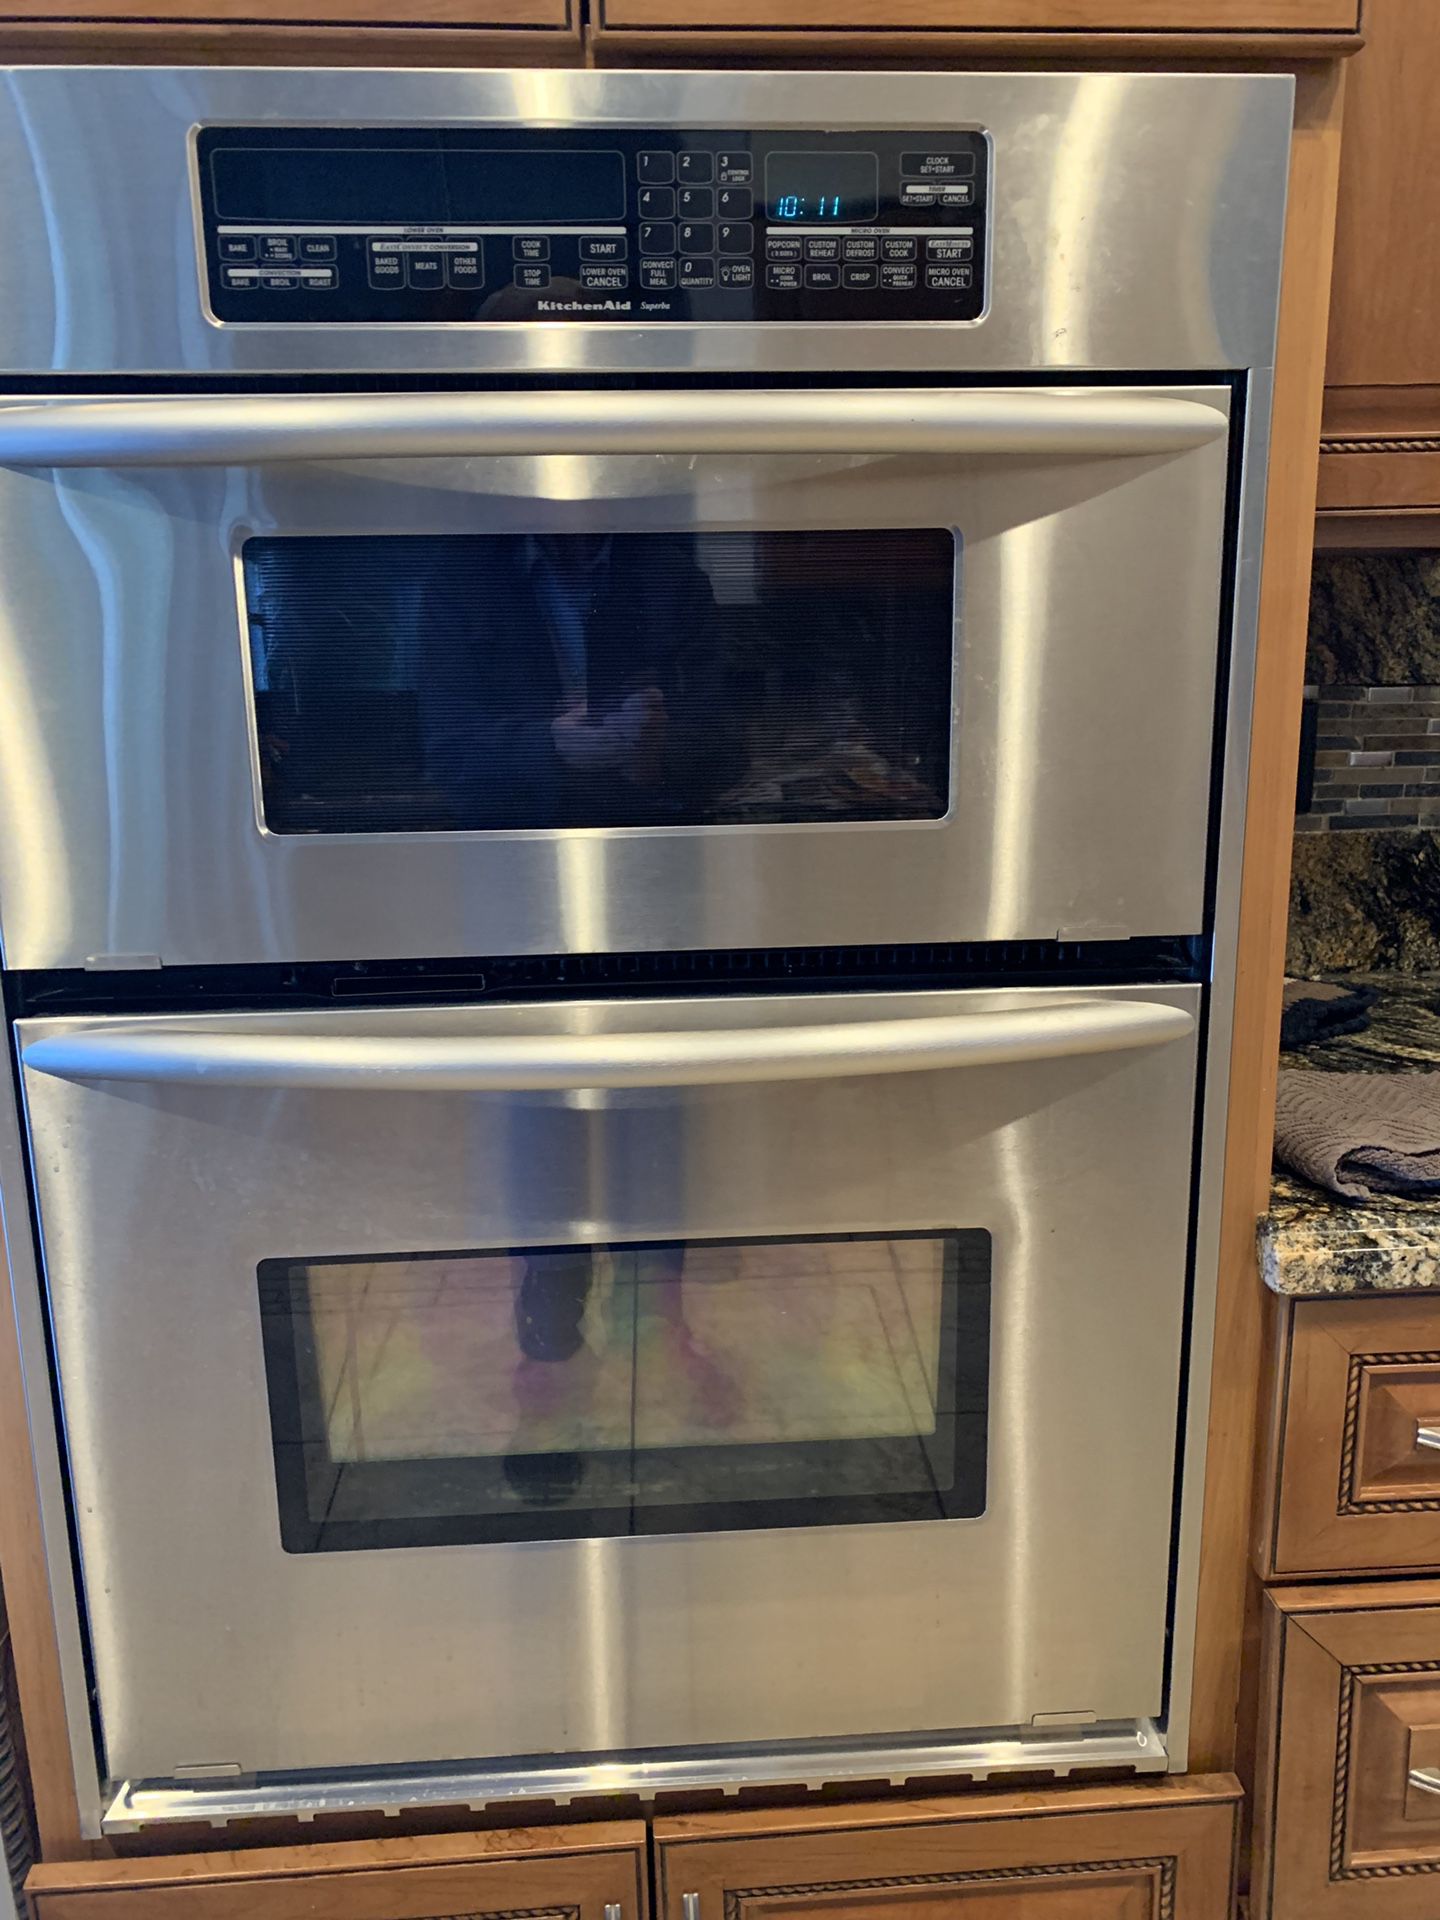 Kitchenaid. 30” convection. Self clean wall oven/microwave combo. Excellent condition. $1550. Ph # please.